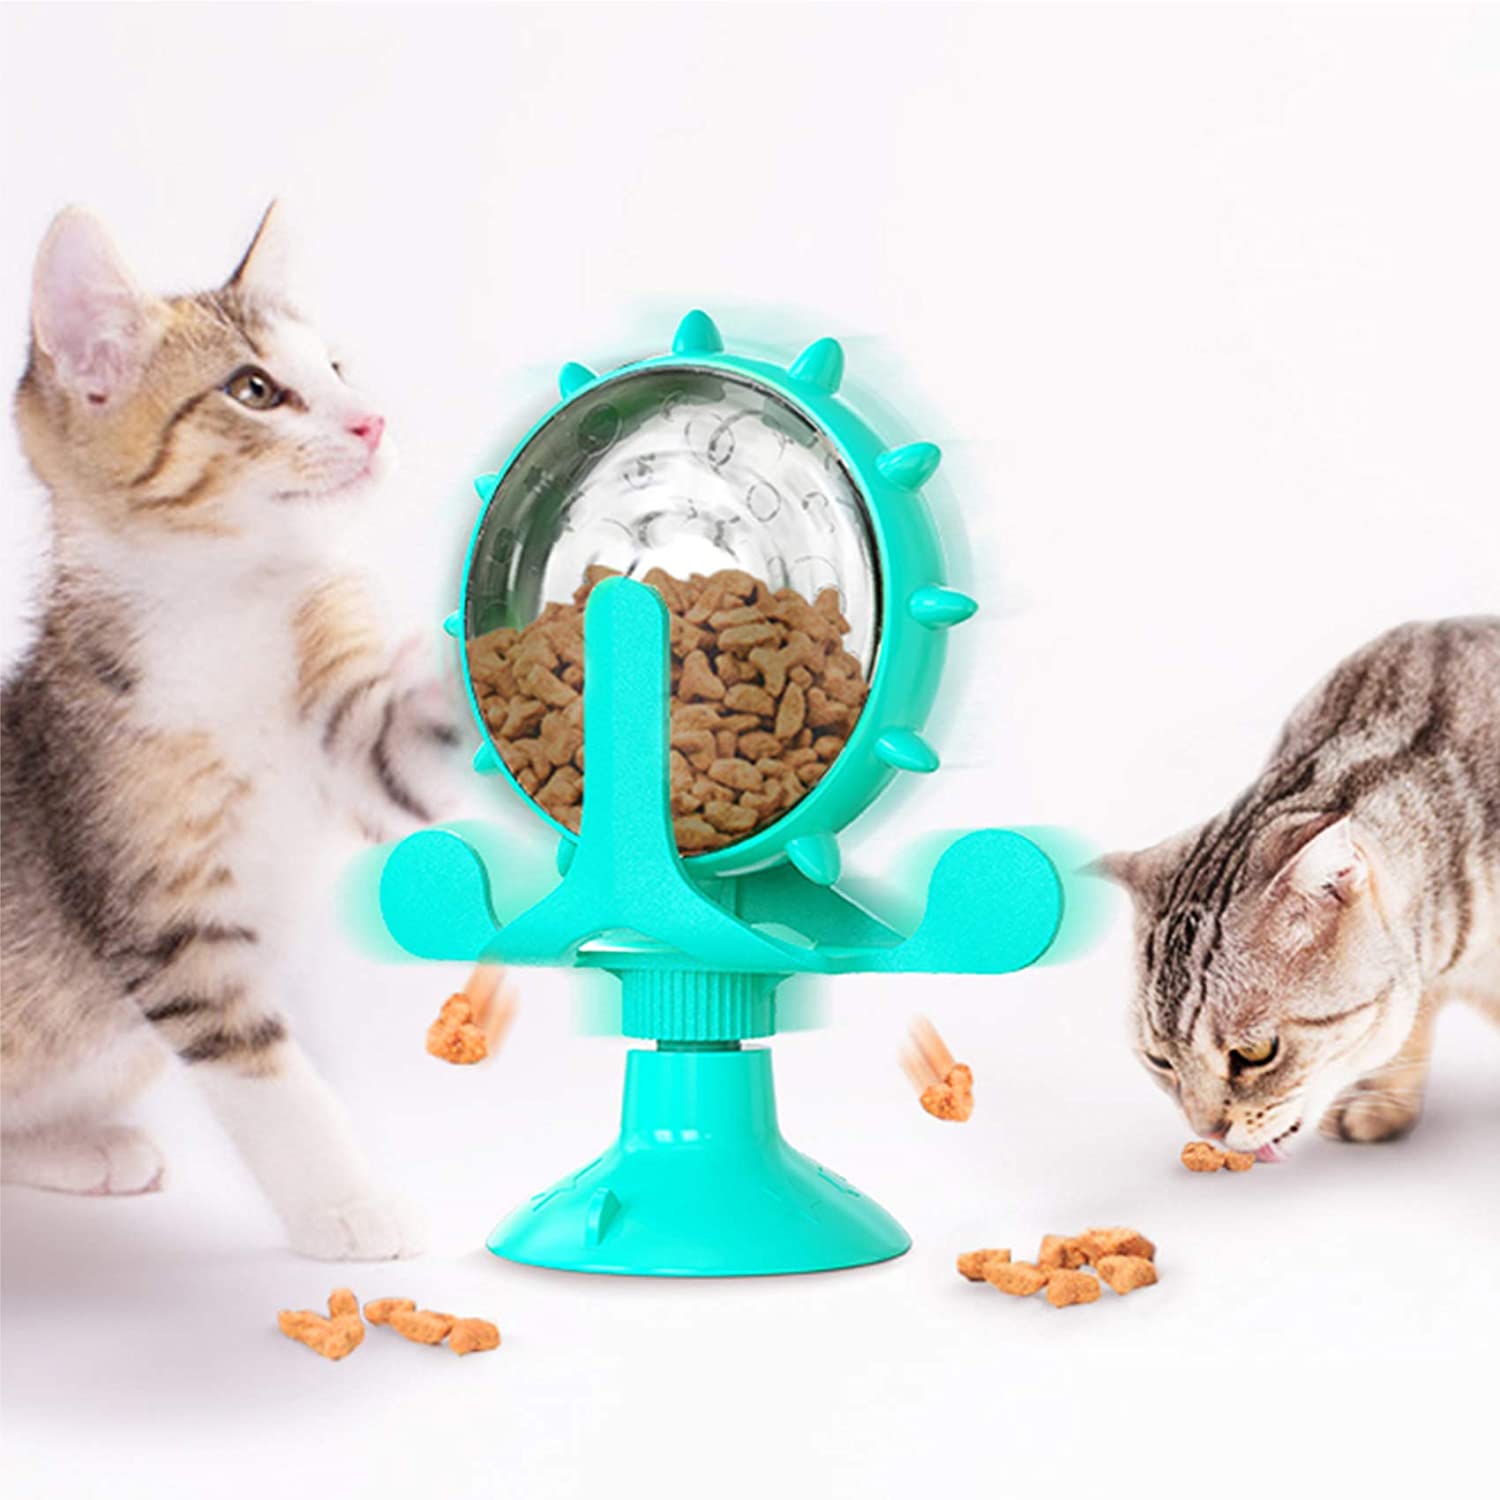 Leaking cat and dog toys Rotating dog feeder Leaking food training ball exercise IQ toy cat windmill toy pet supplies